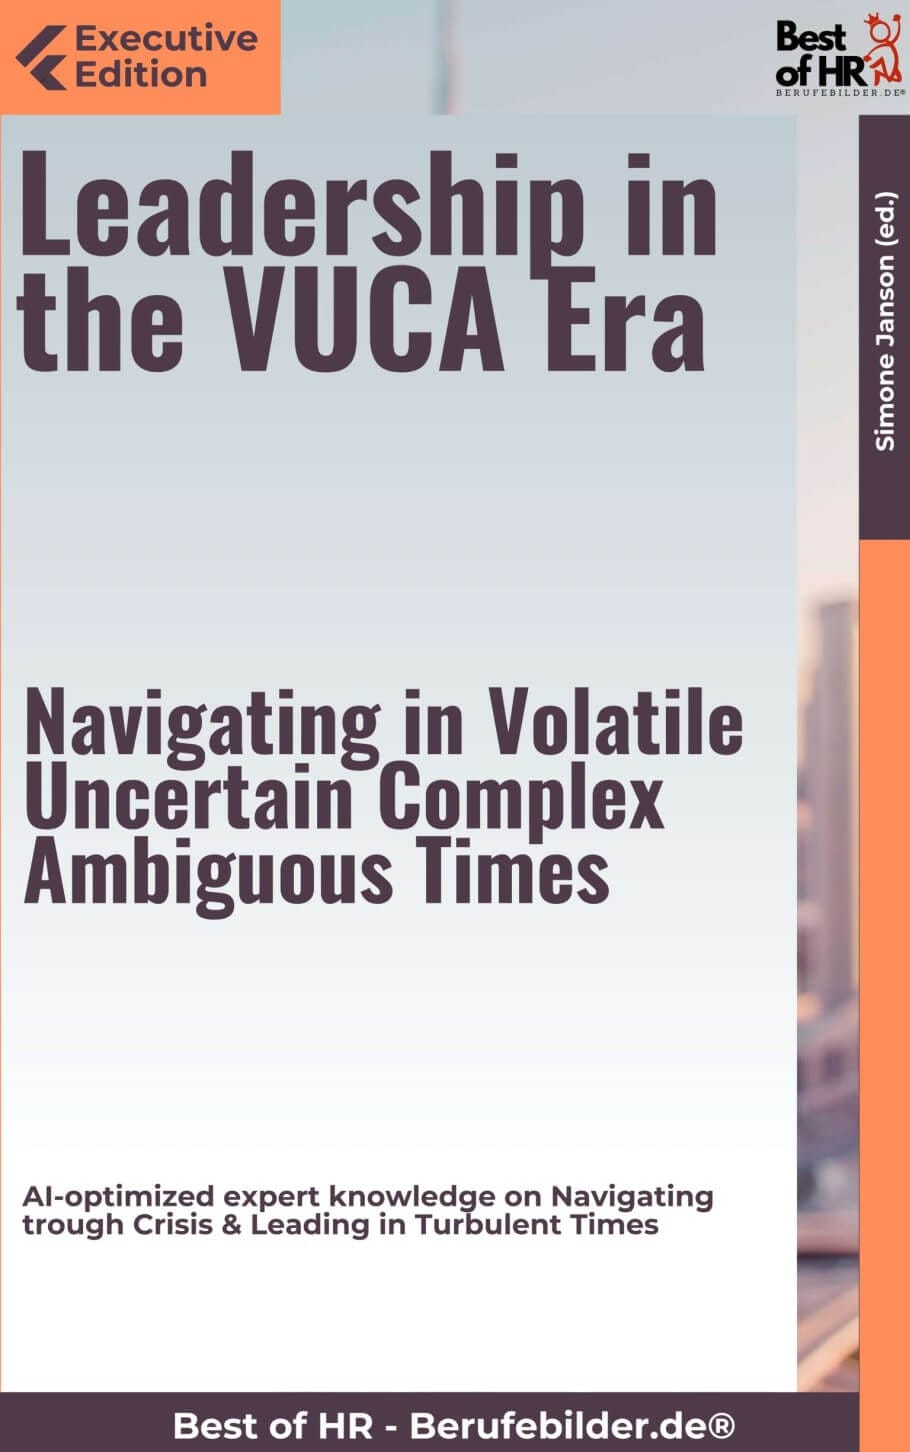 Leadership in the VUCA Era – Navigating in Volatile, Uncertain, Complex, Ambiguous Times (Engl. Version)